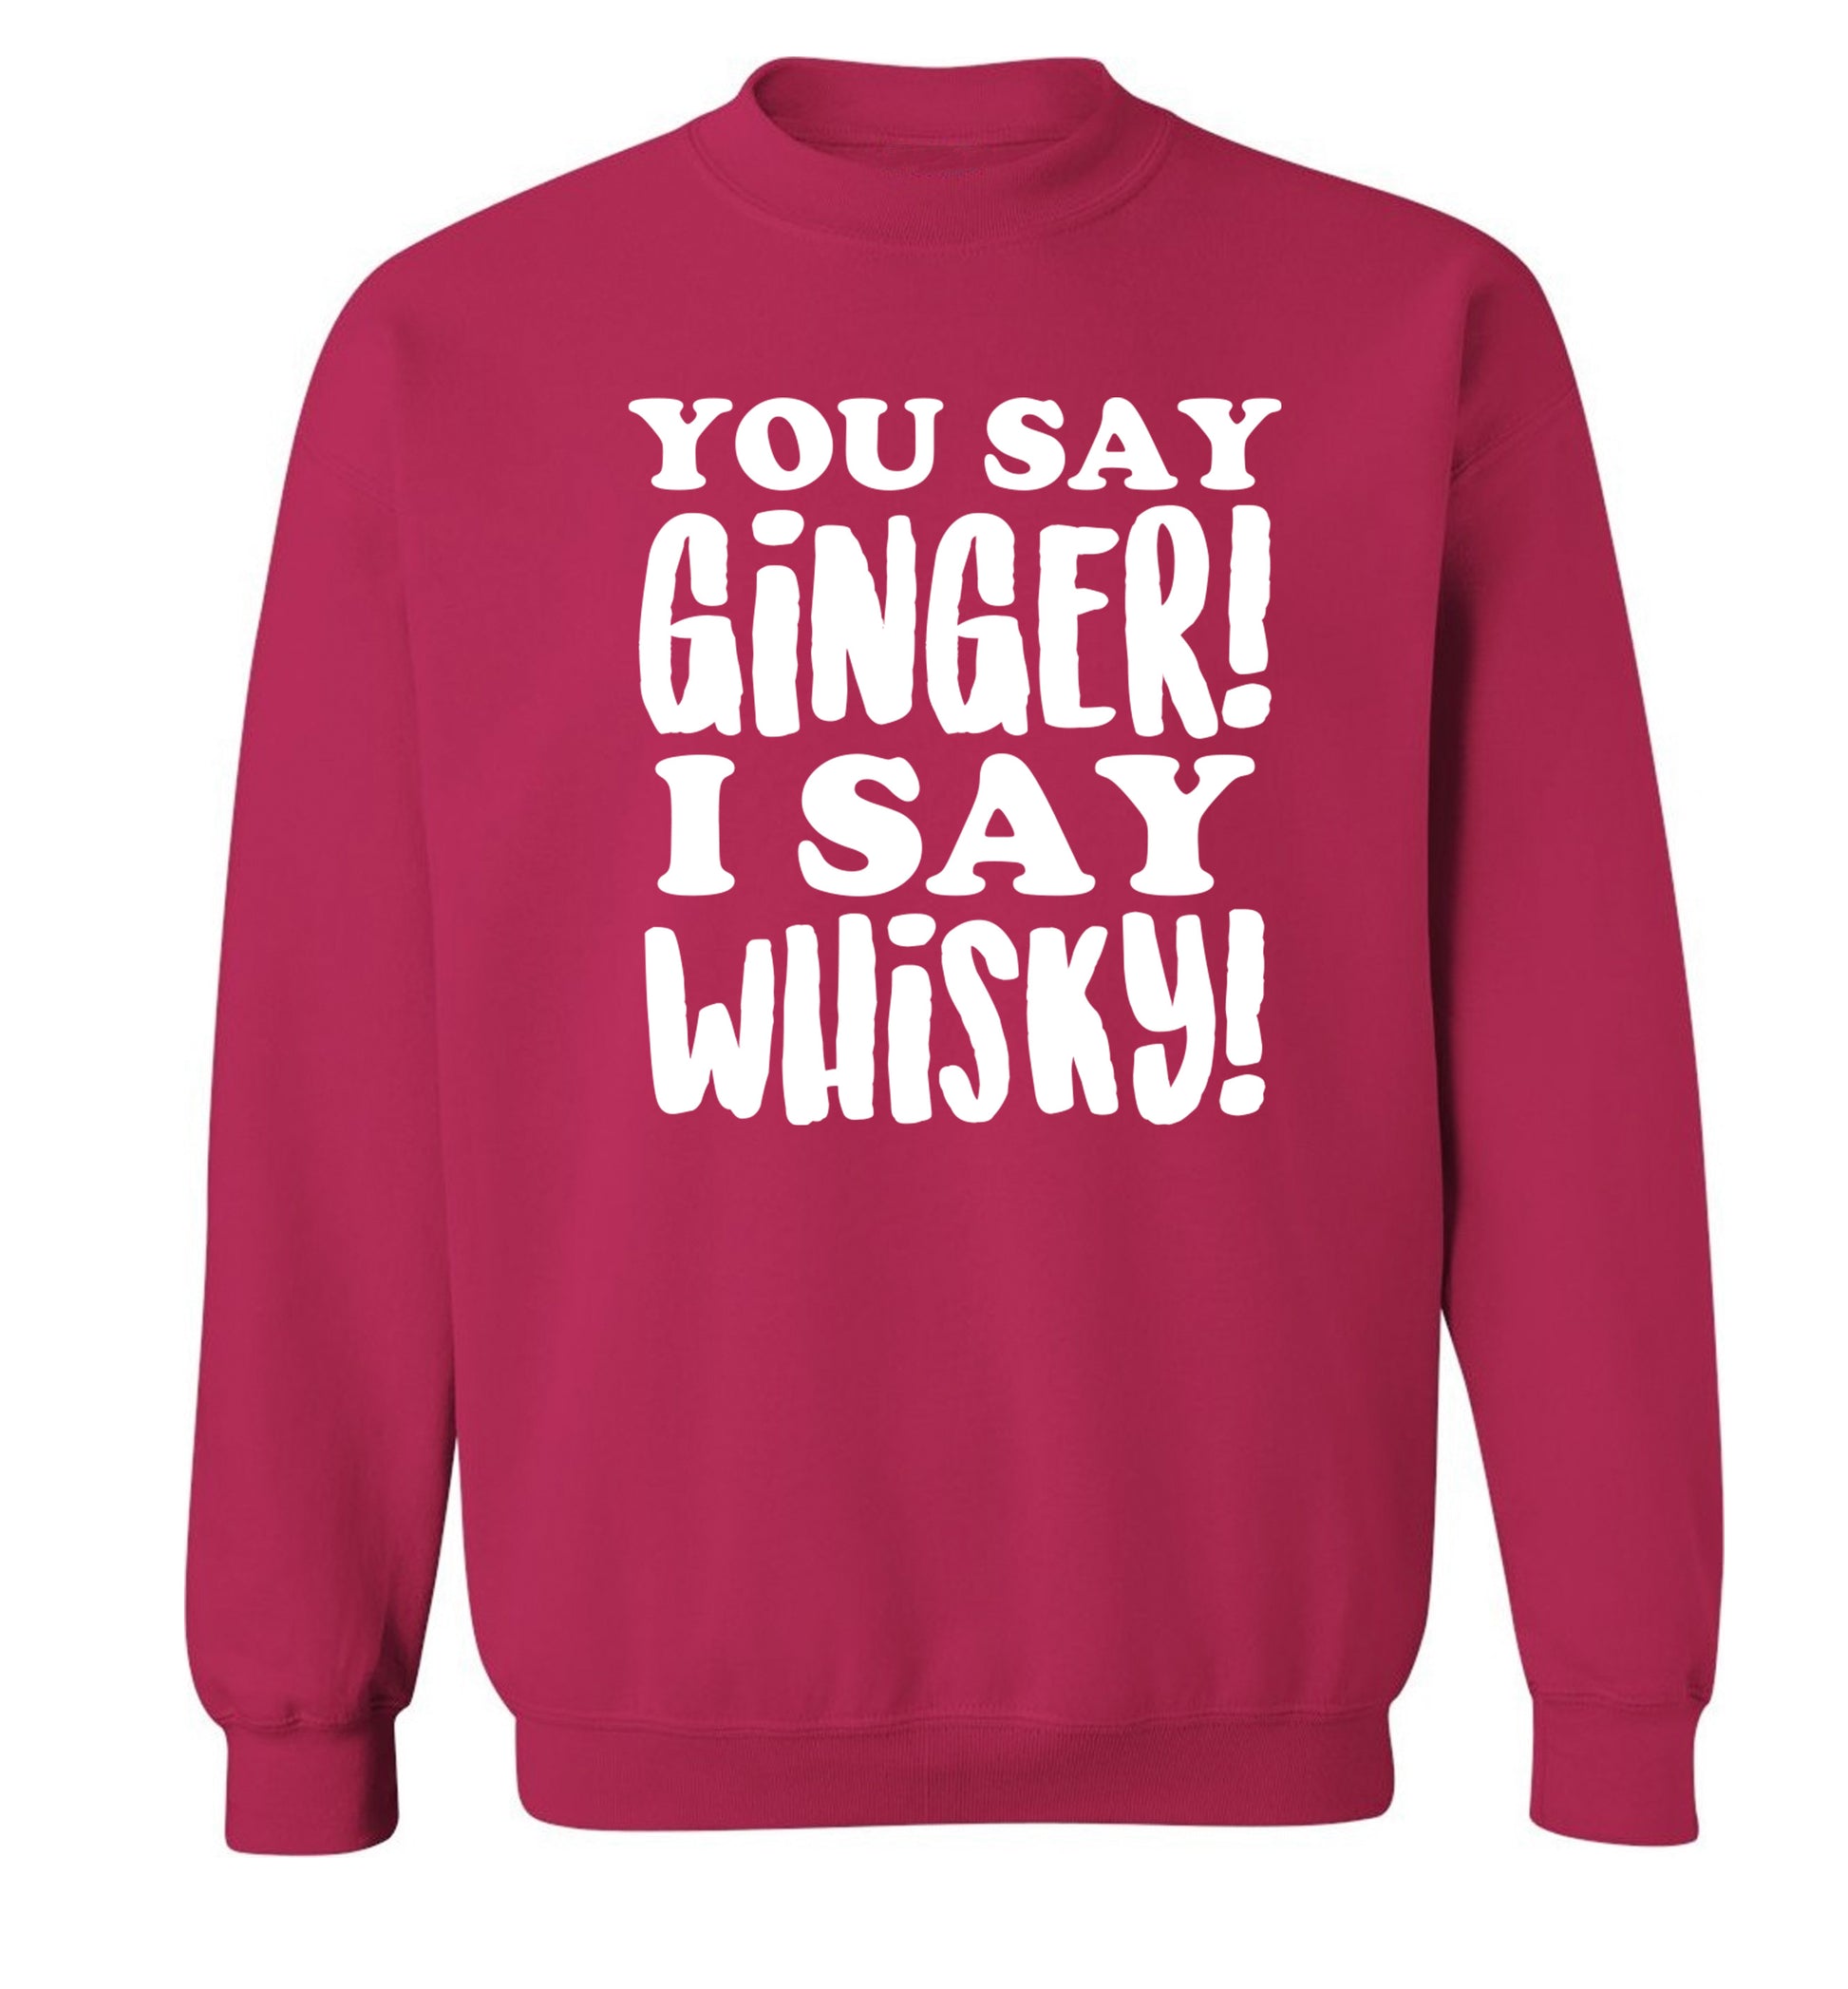 You say ginger I say whisky! Adult's unisex pink Sweater 2XL